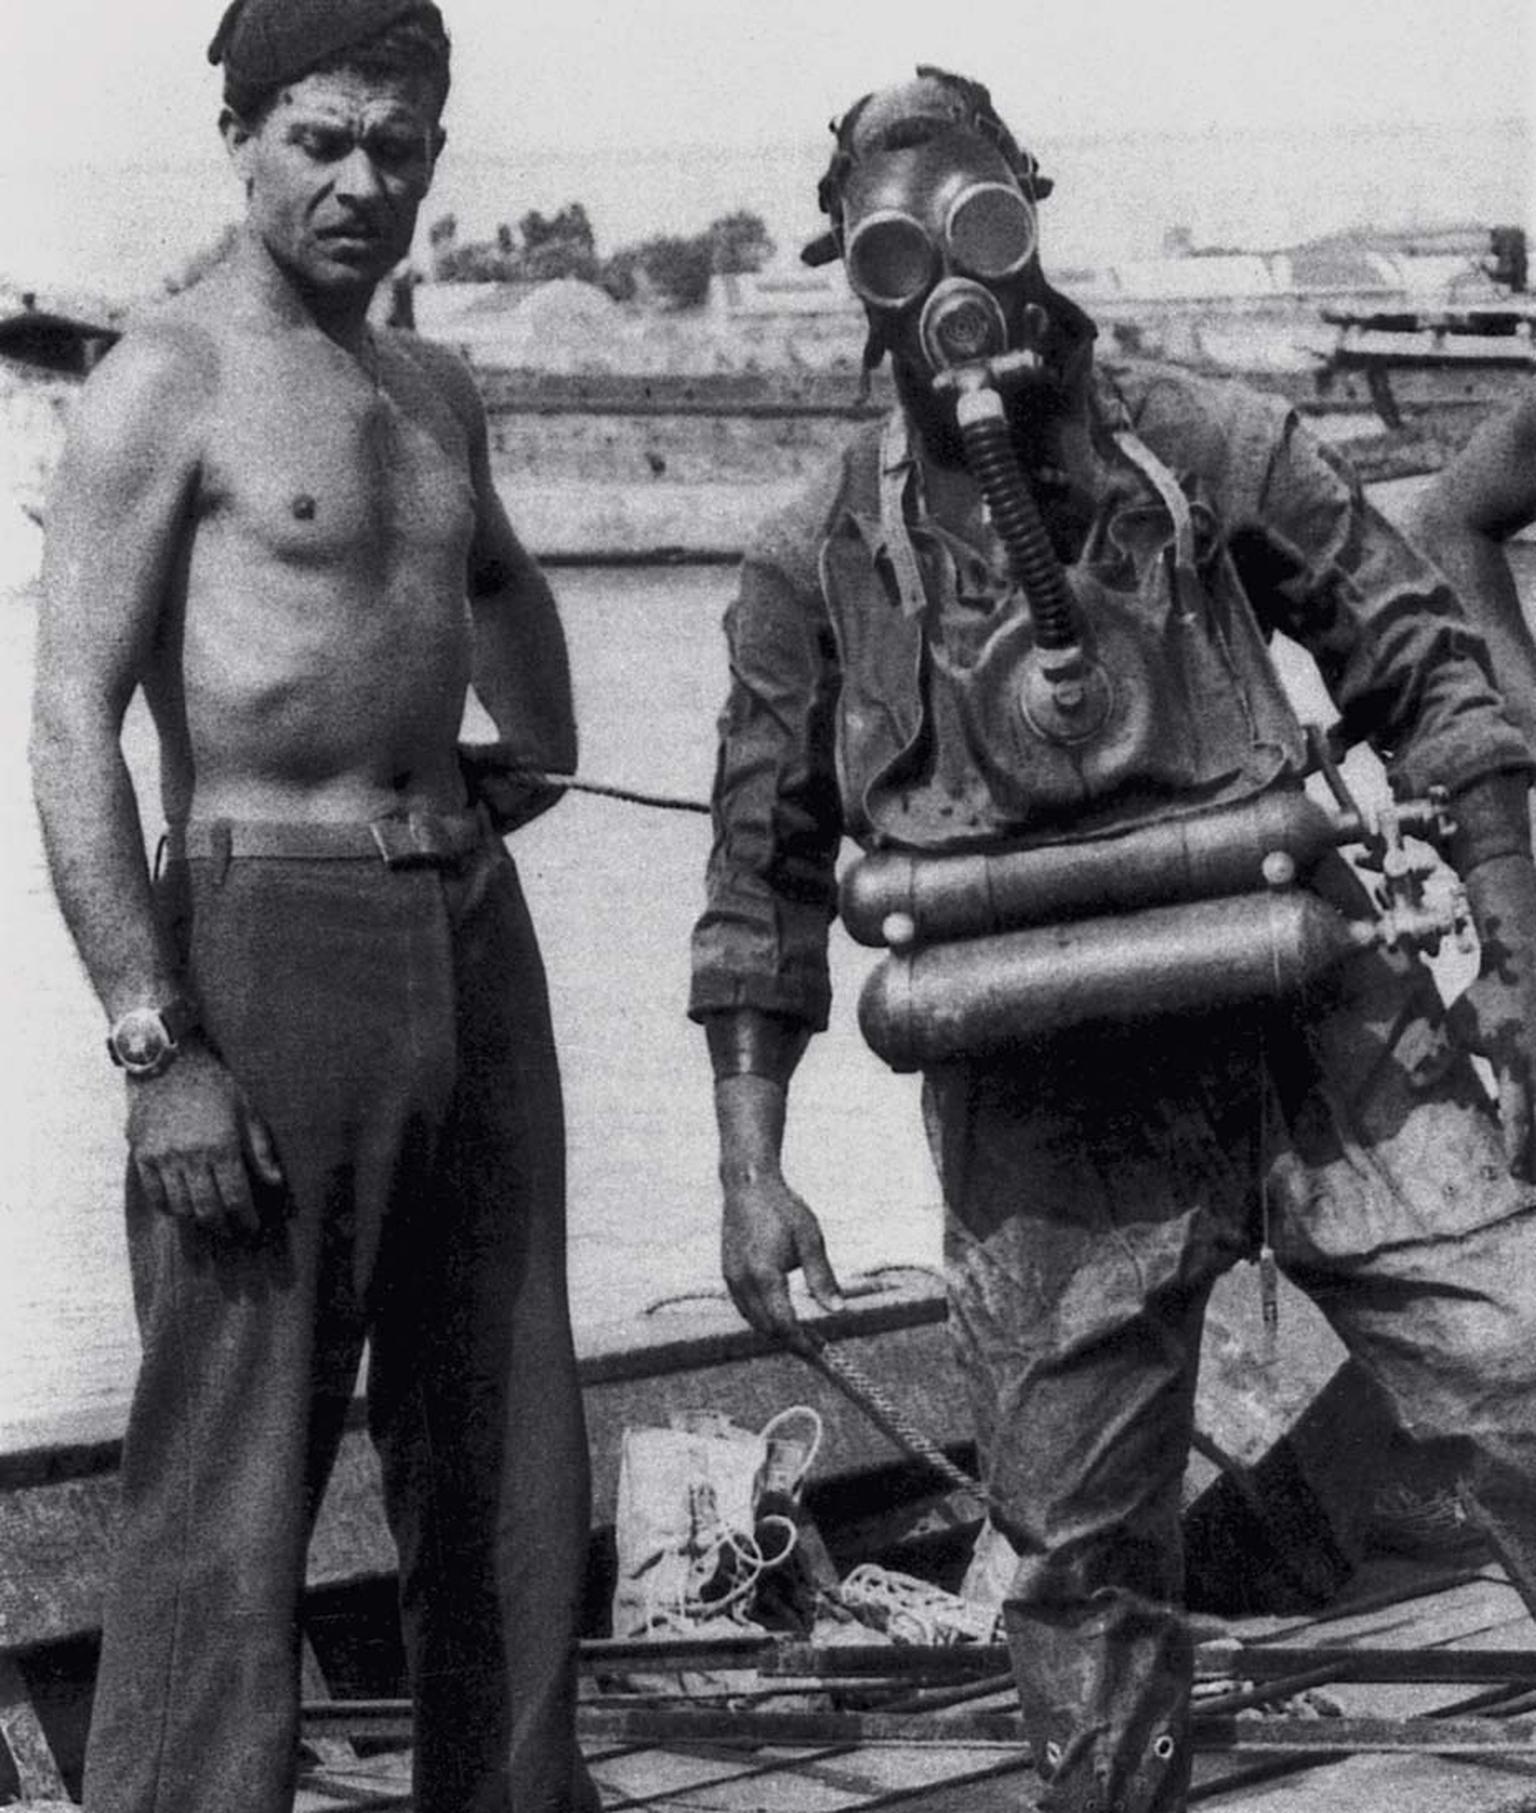 Italian Navy frogmen relied on the precision instruments with superior luminescence supplied to them by Panerai including depth gauges, compasses, underwater torches and watches.